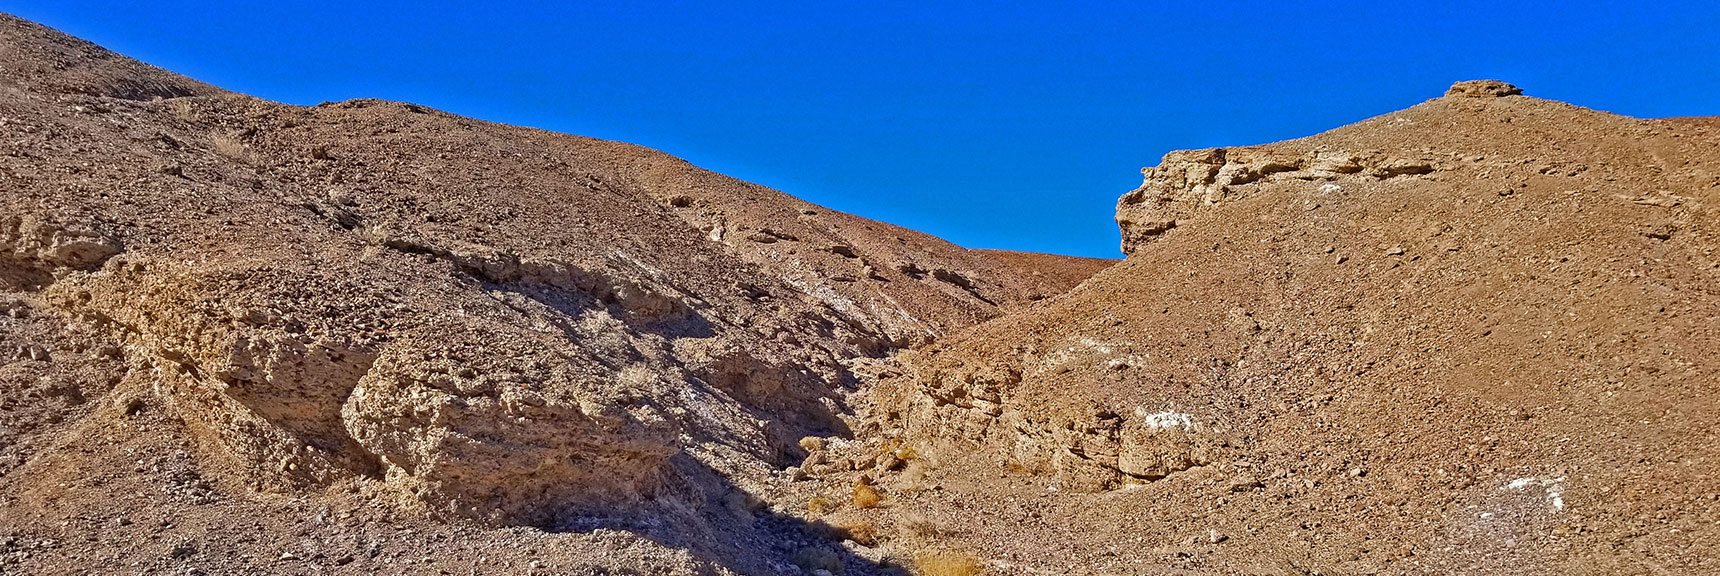 Decision to Take the Eastern Approach to the Summit. Ascend Ridge to Left. | Tea House & Table Rock Circuit | Furnace Creek | Death Valley National Park, California